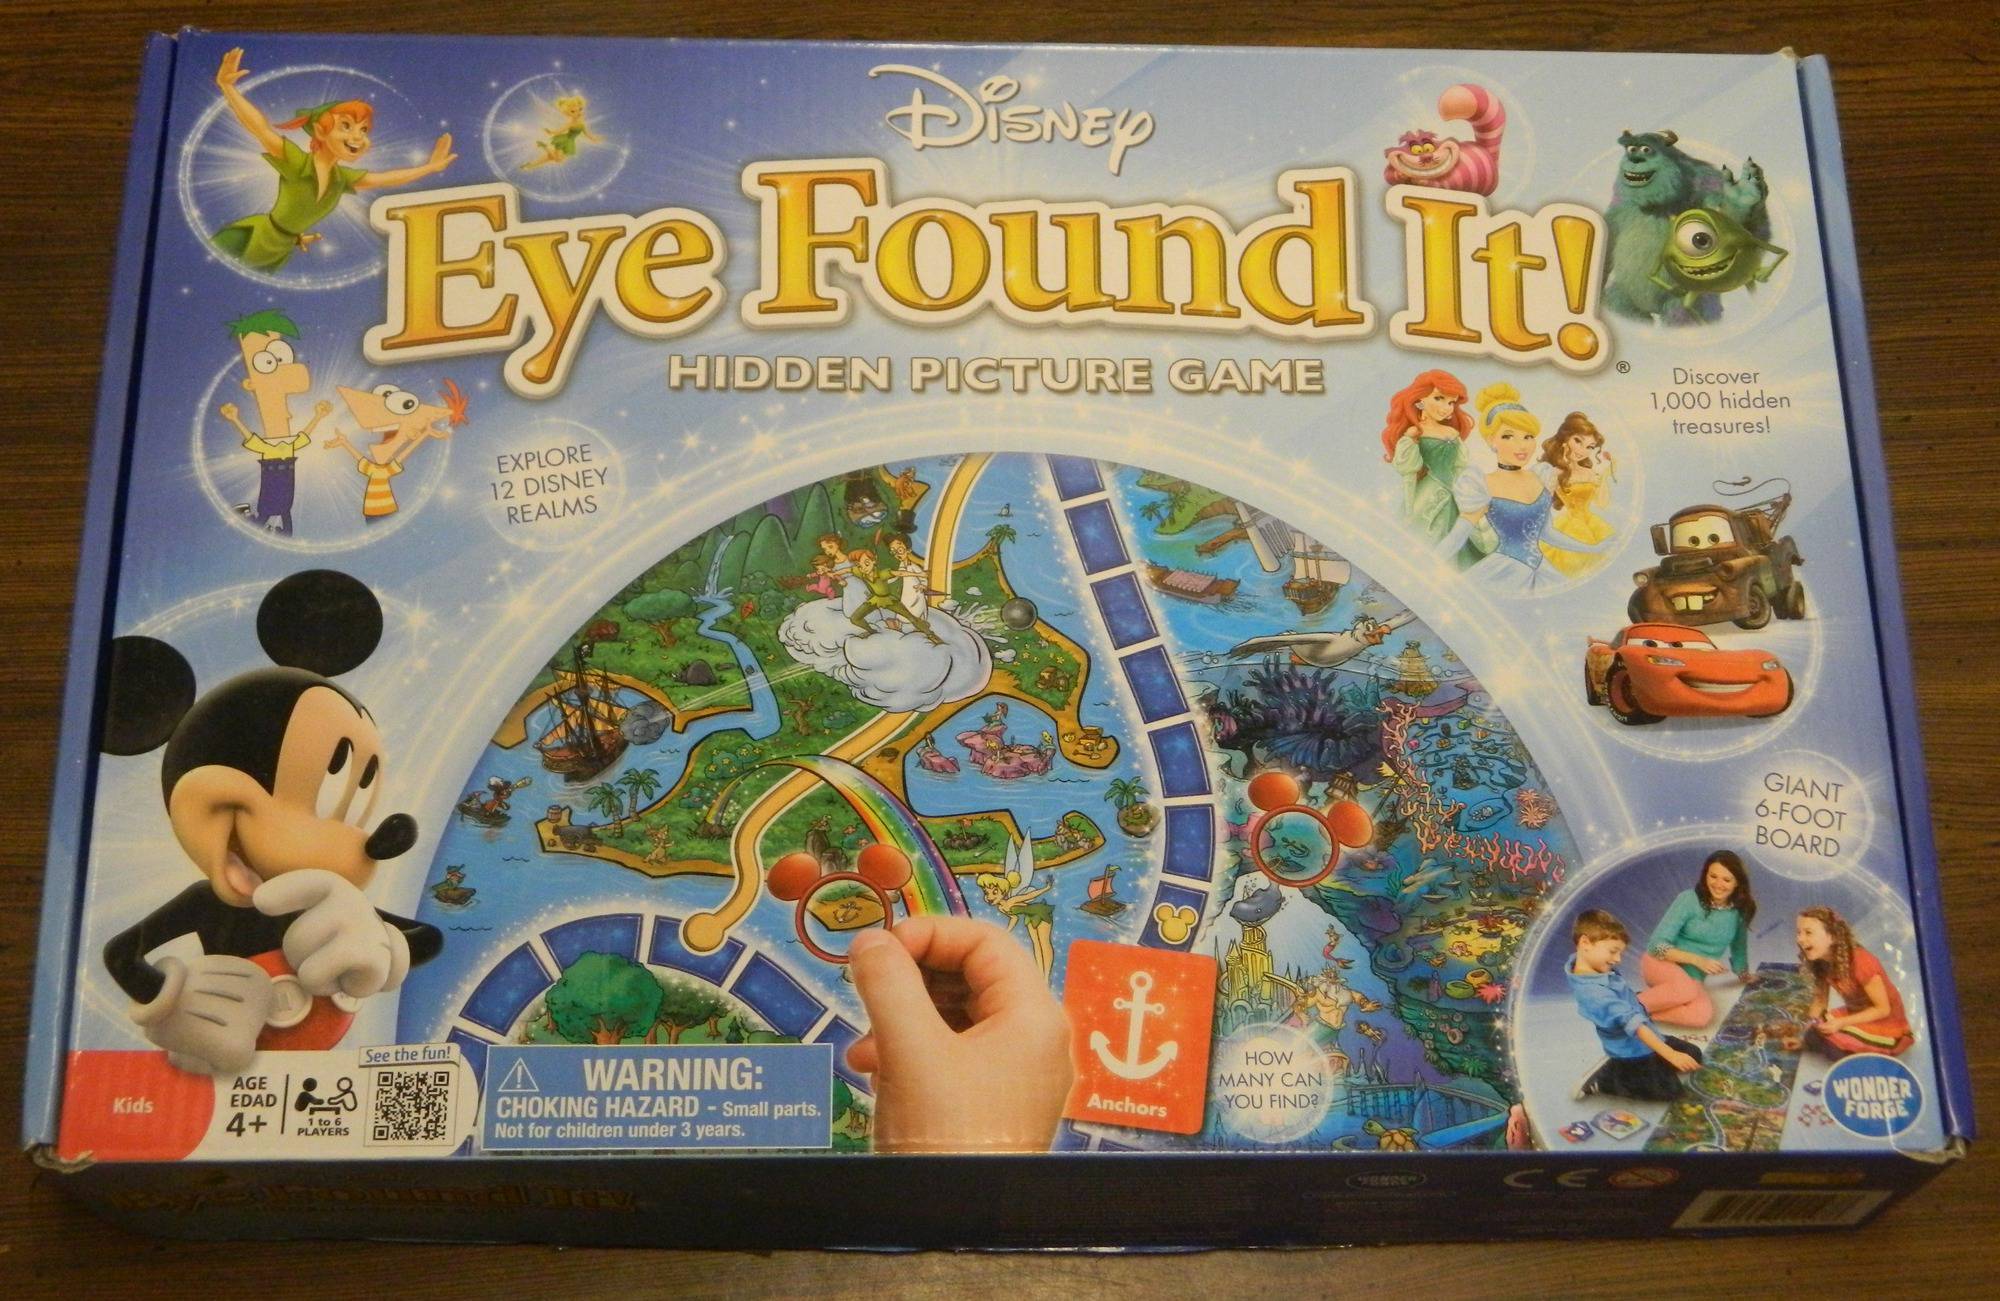 Disney Eye Found It! Board Game Review and Rules